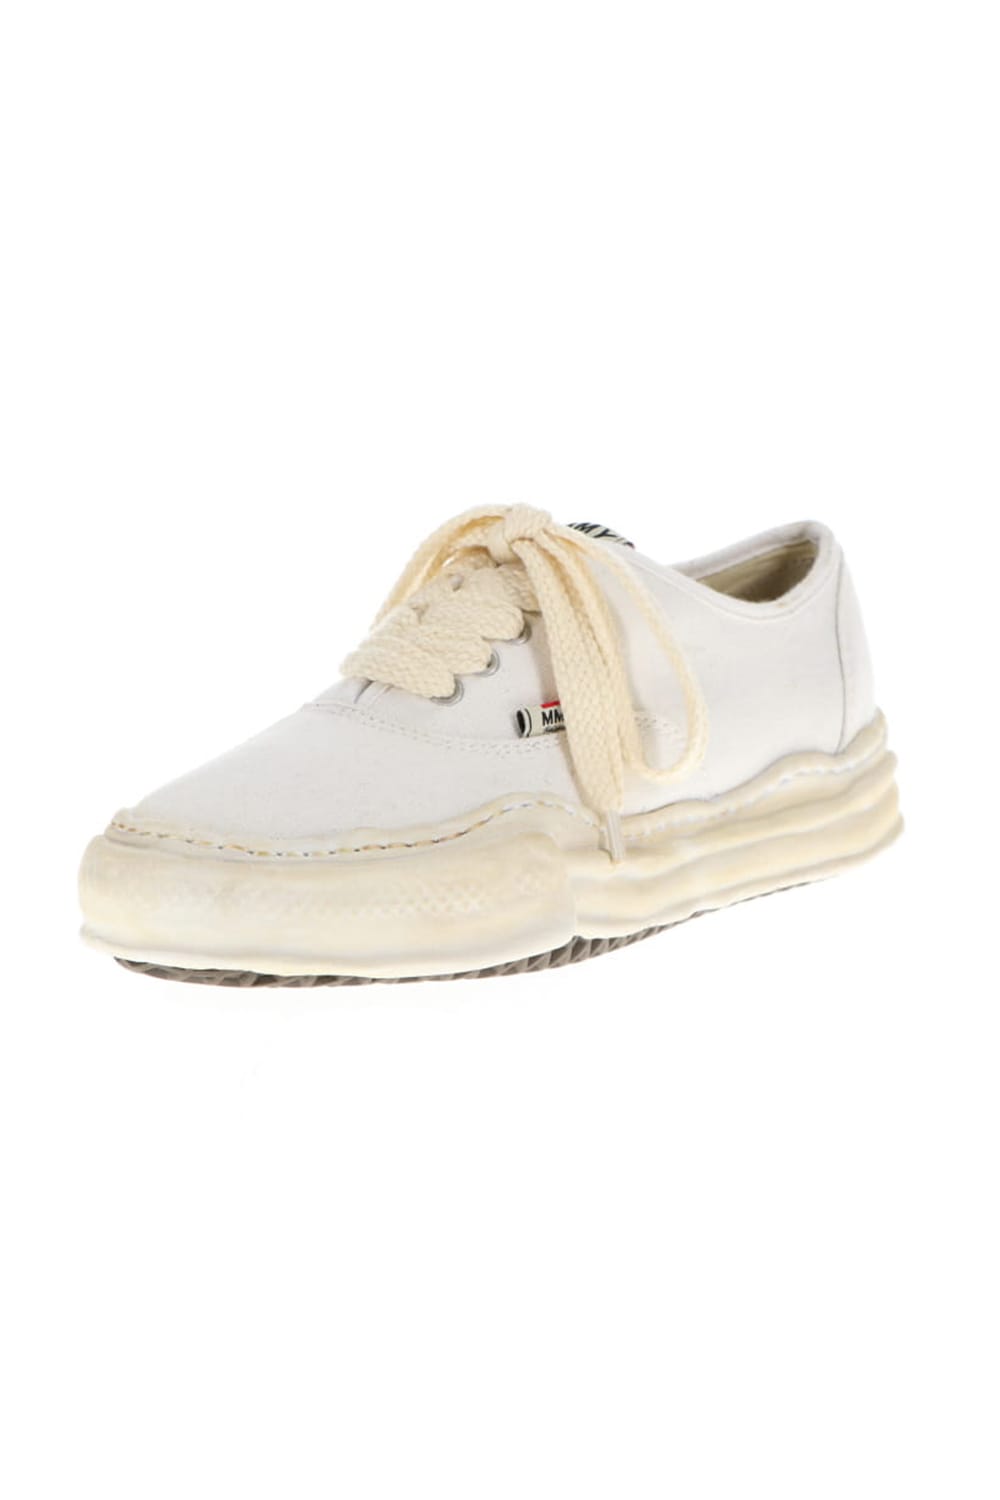 -BAKER- Over-dyed original sole canvas Low-Top sneakers White